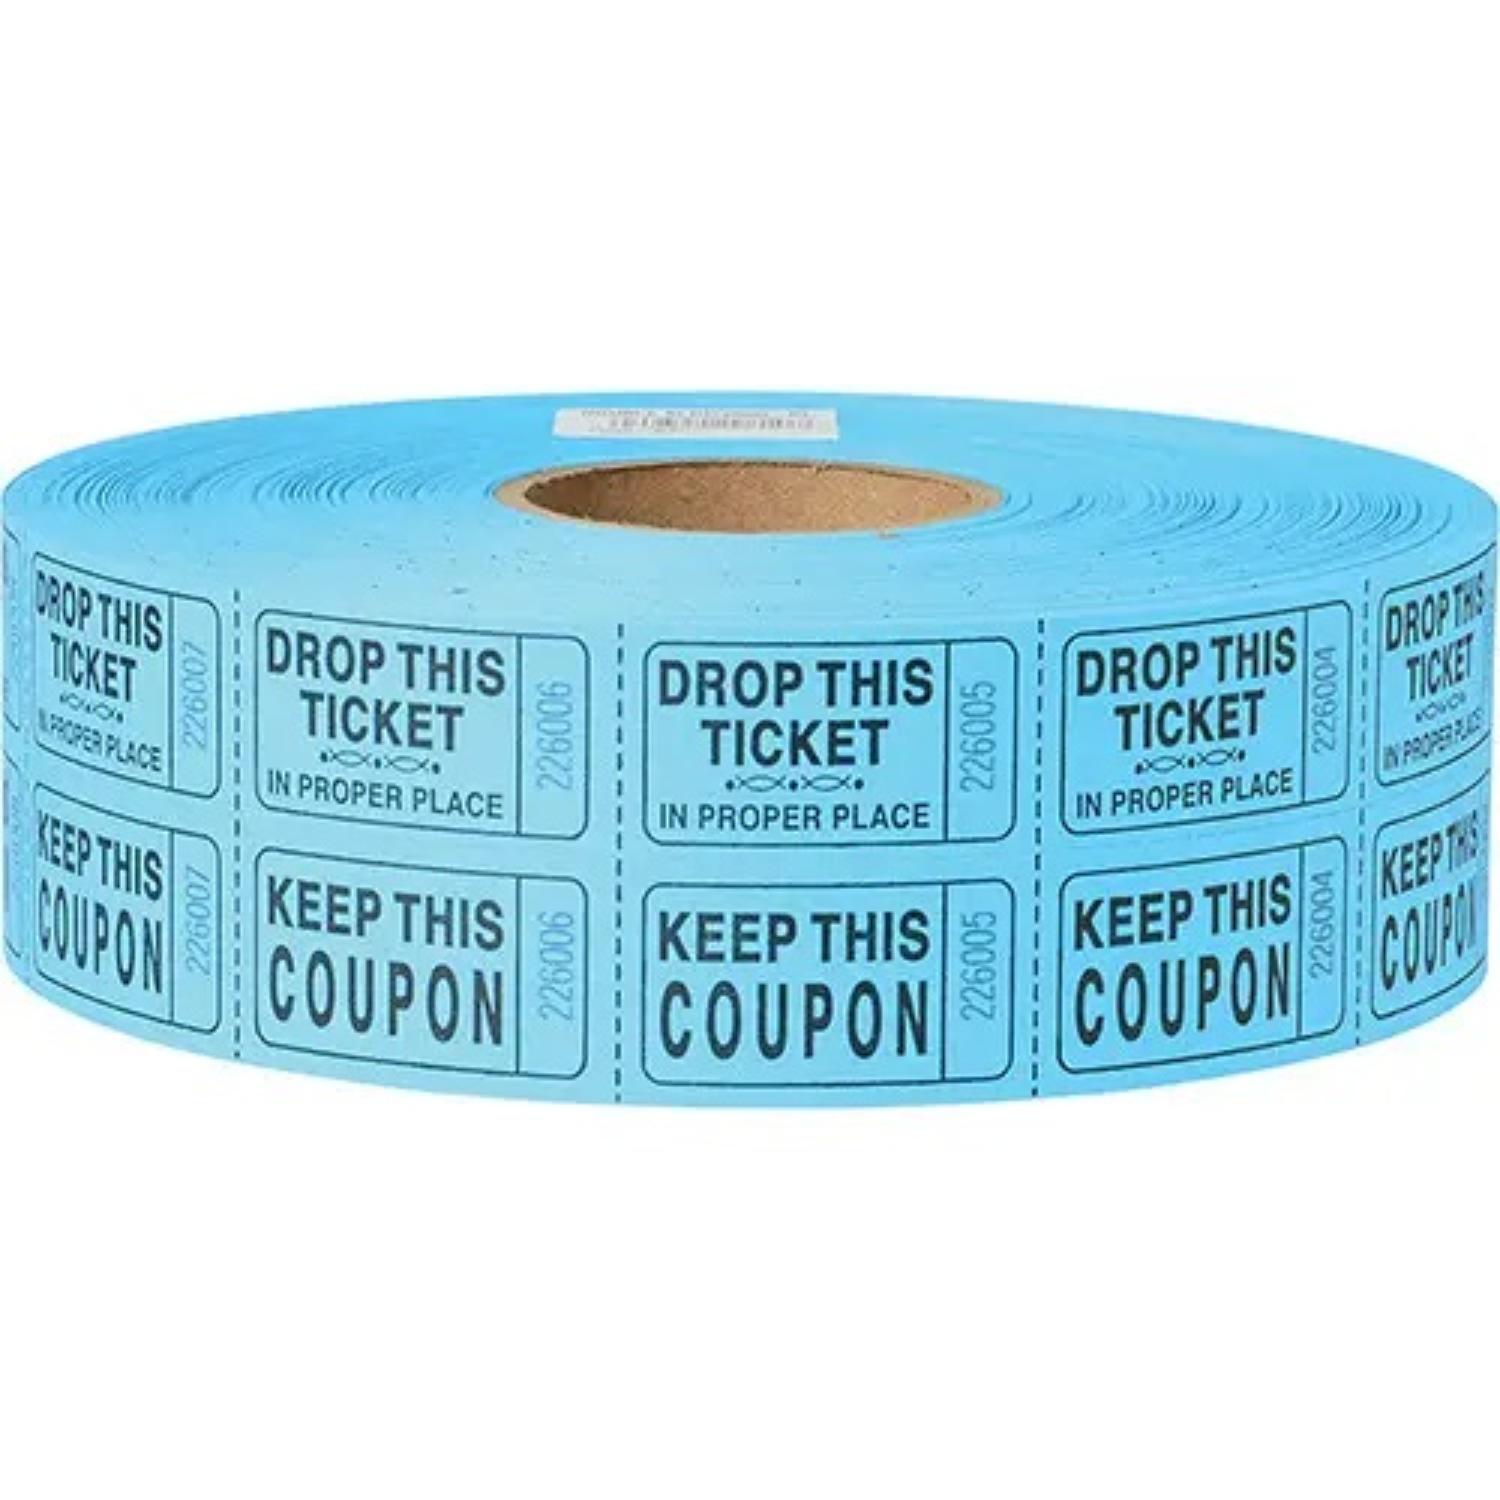 Double Ticket Blue - 2000 tickets